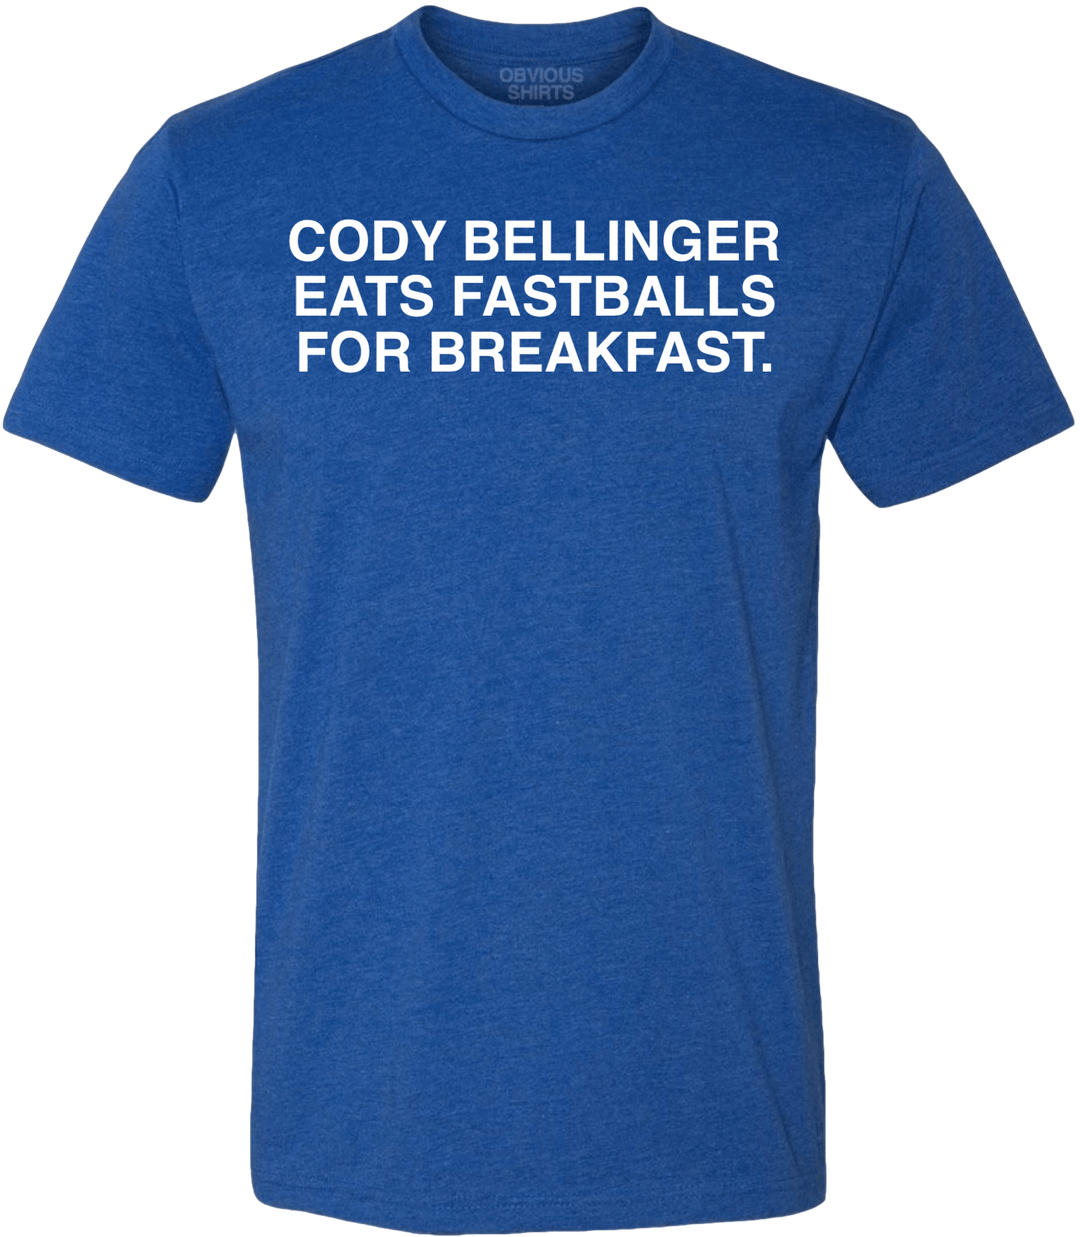 CODY BELLINGER EATS FASTBALLS FOR BREAKFAST. - OBVIOUS SHIRTS